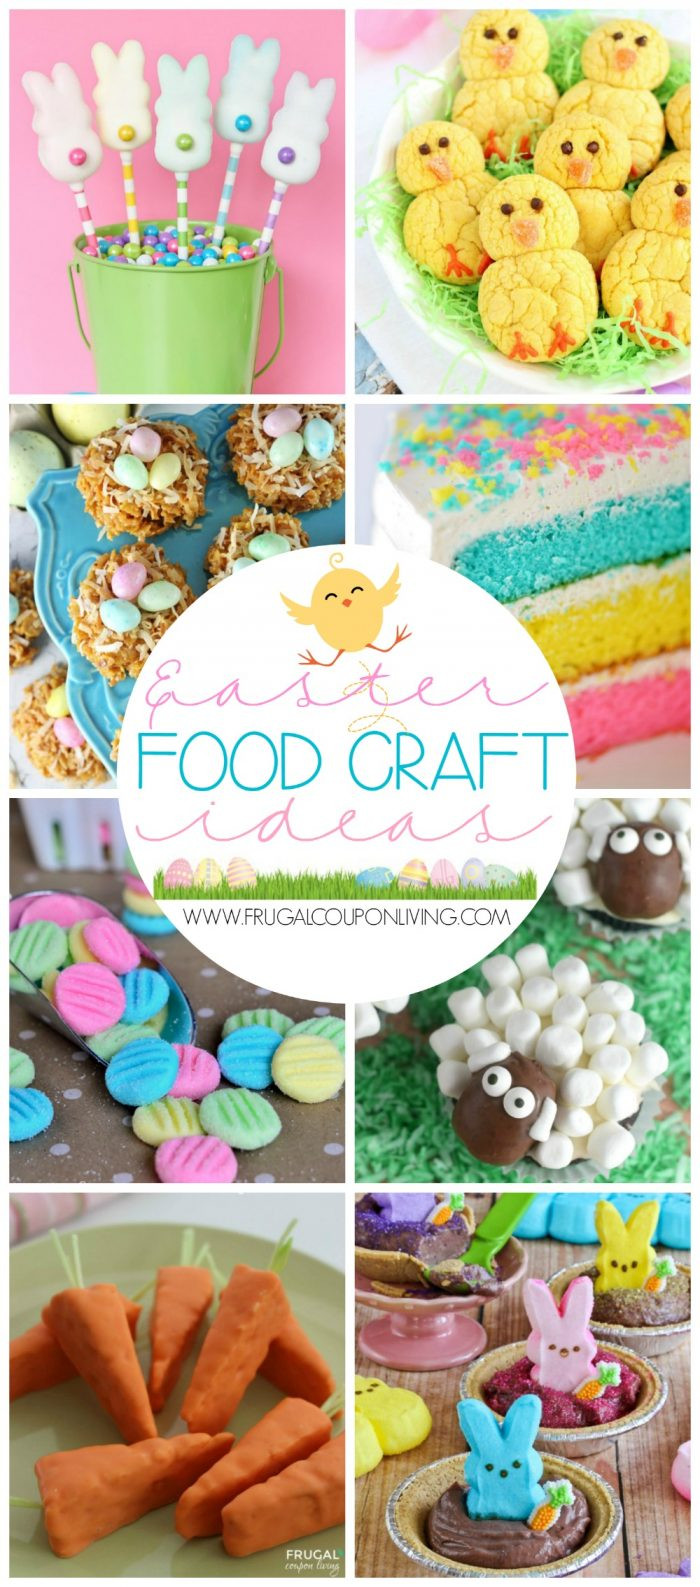 Easter Pinterest Ideas
 Easter Food Craft Ideas for the Kids